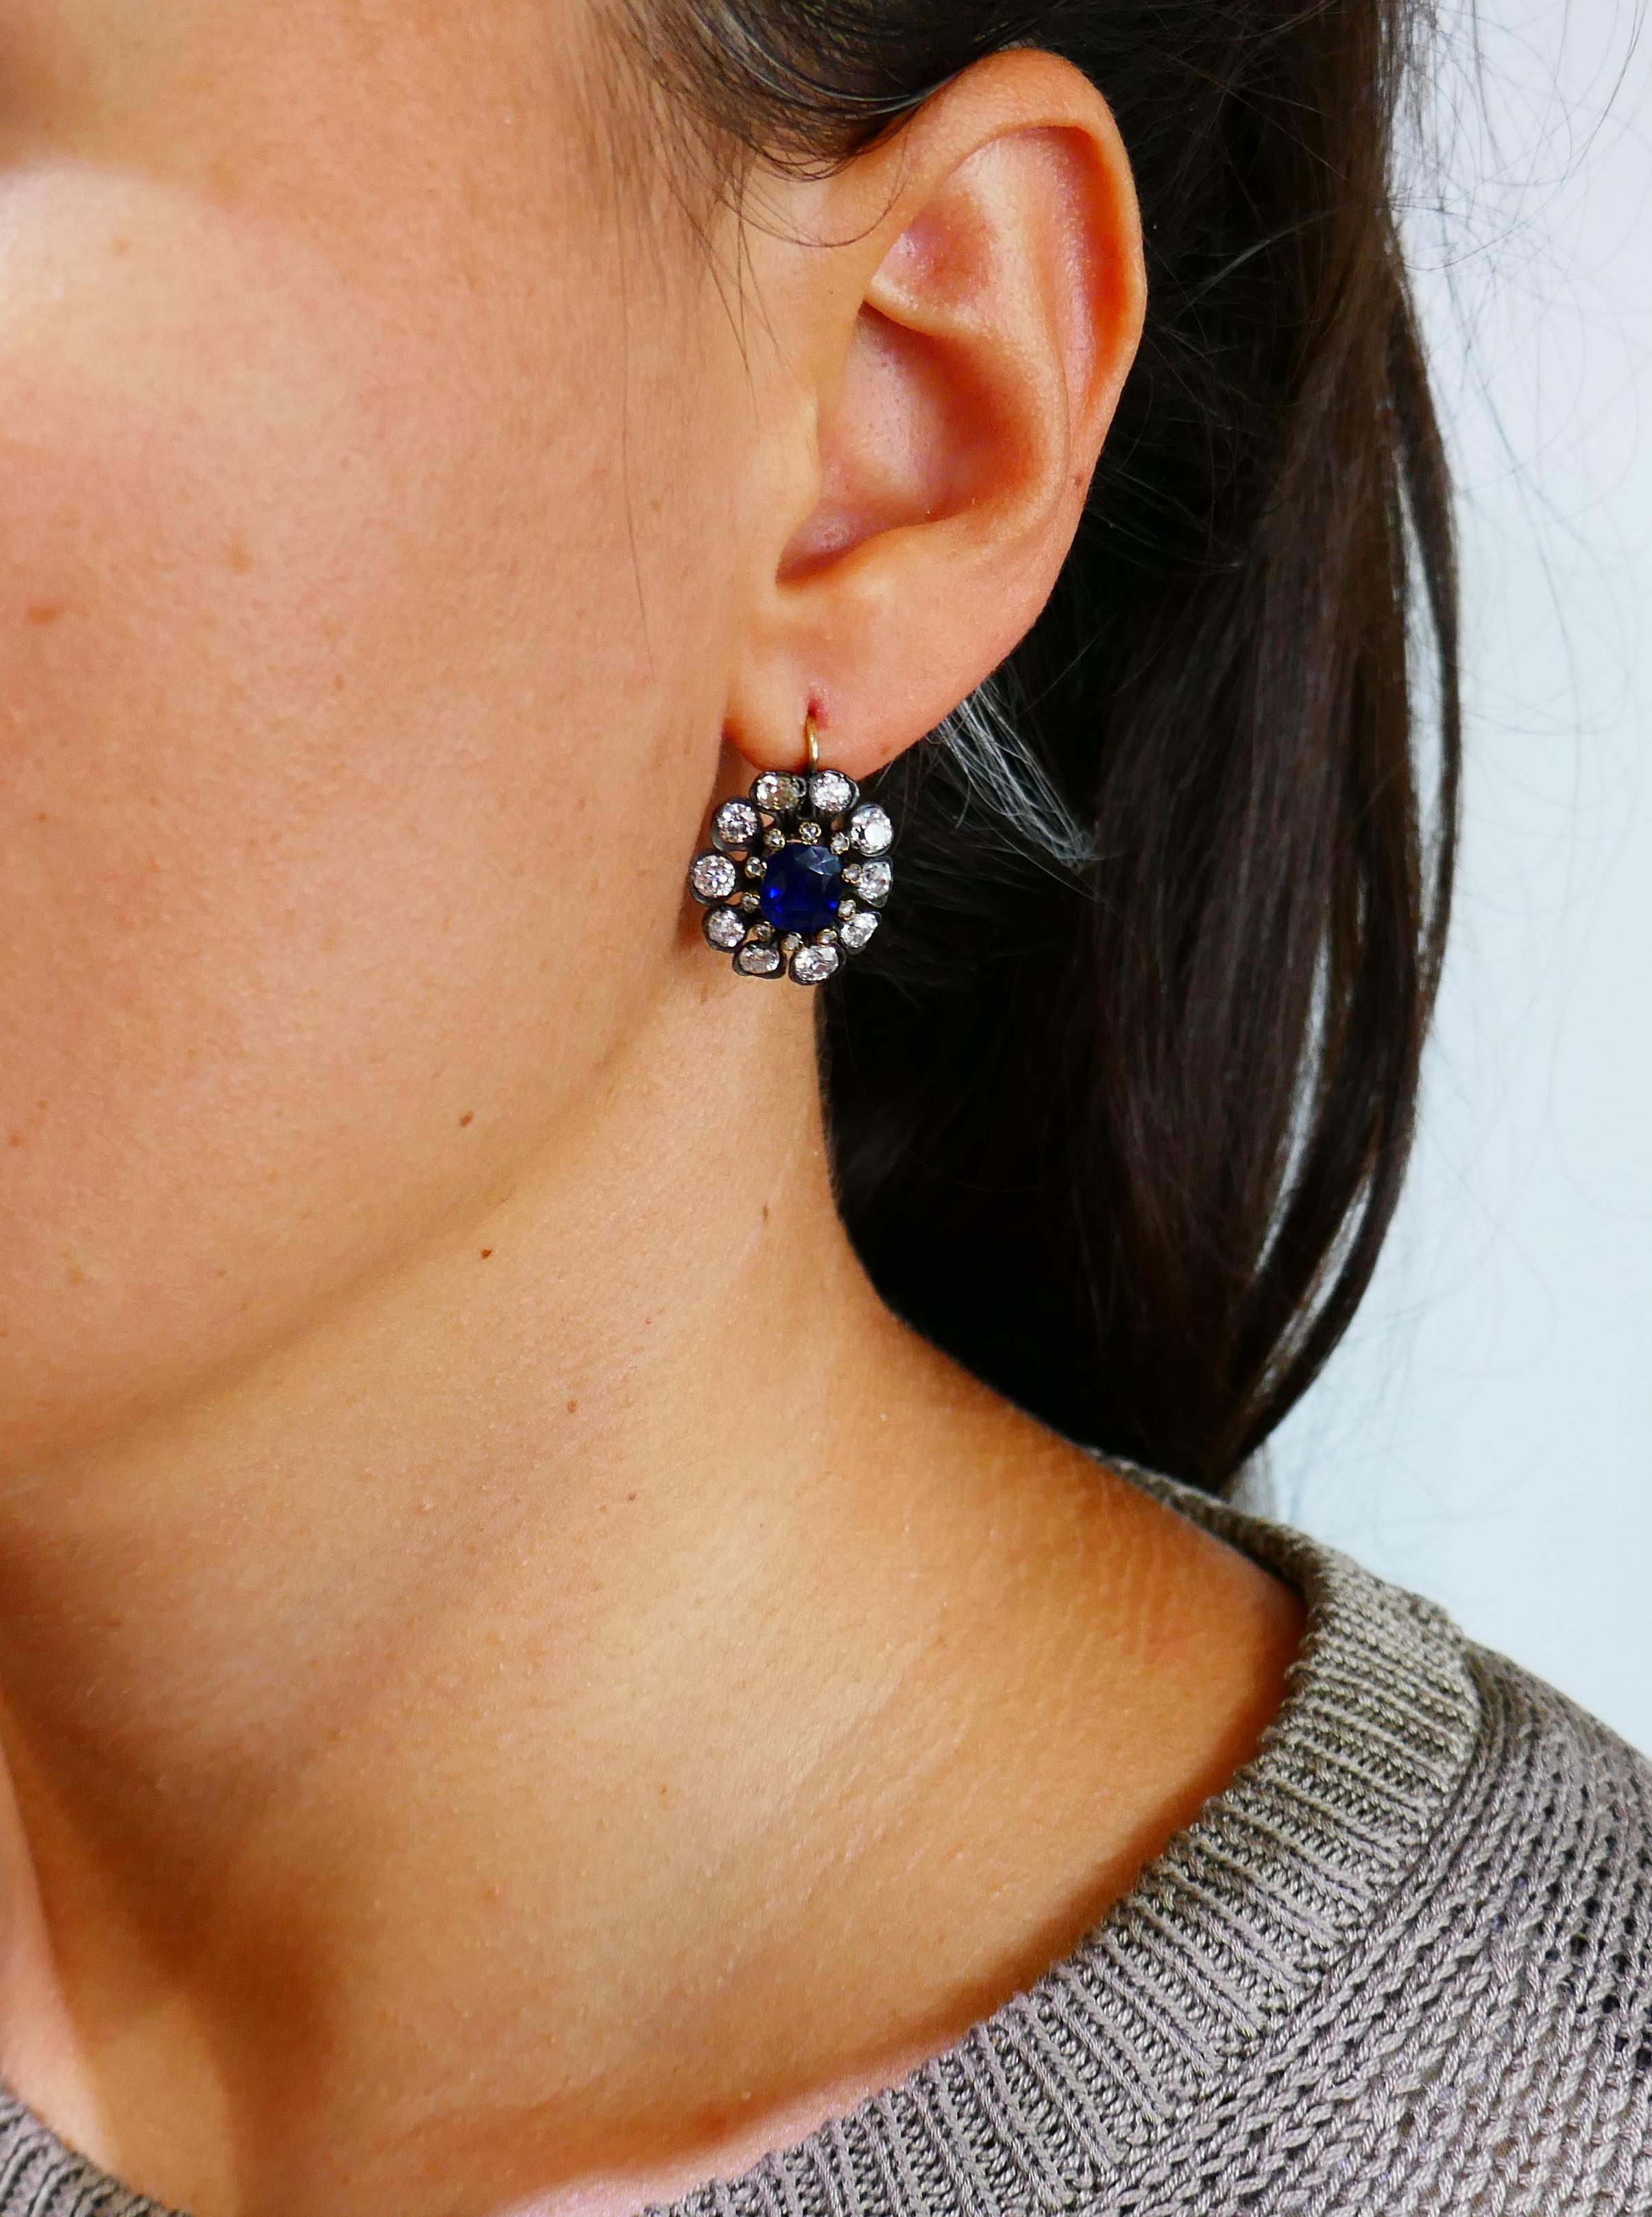 Gorgeous Victorian cluster earrings featuring finest quality sapphires and diamonds. Classic and timeless, the earrings are a great addition to your jewelry collection and will definitely become a family heirloom! 
The sapphires are oval faceted and